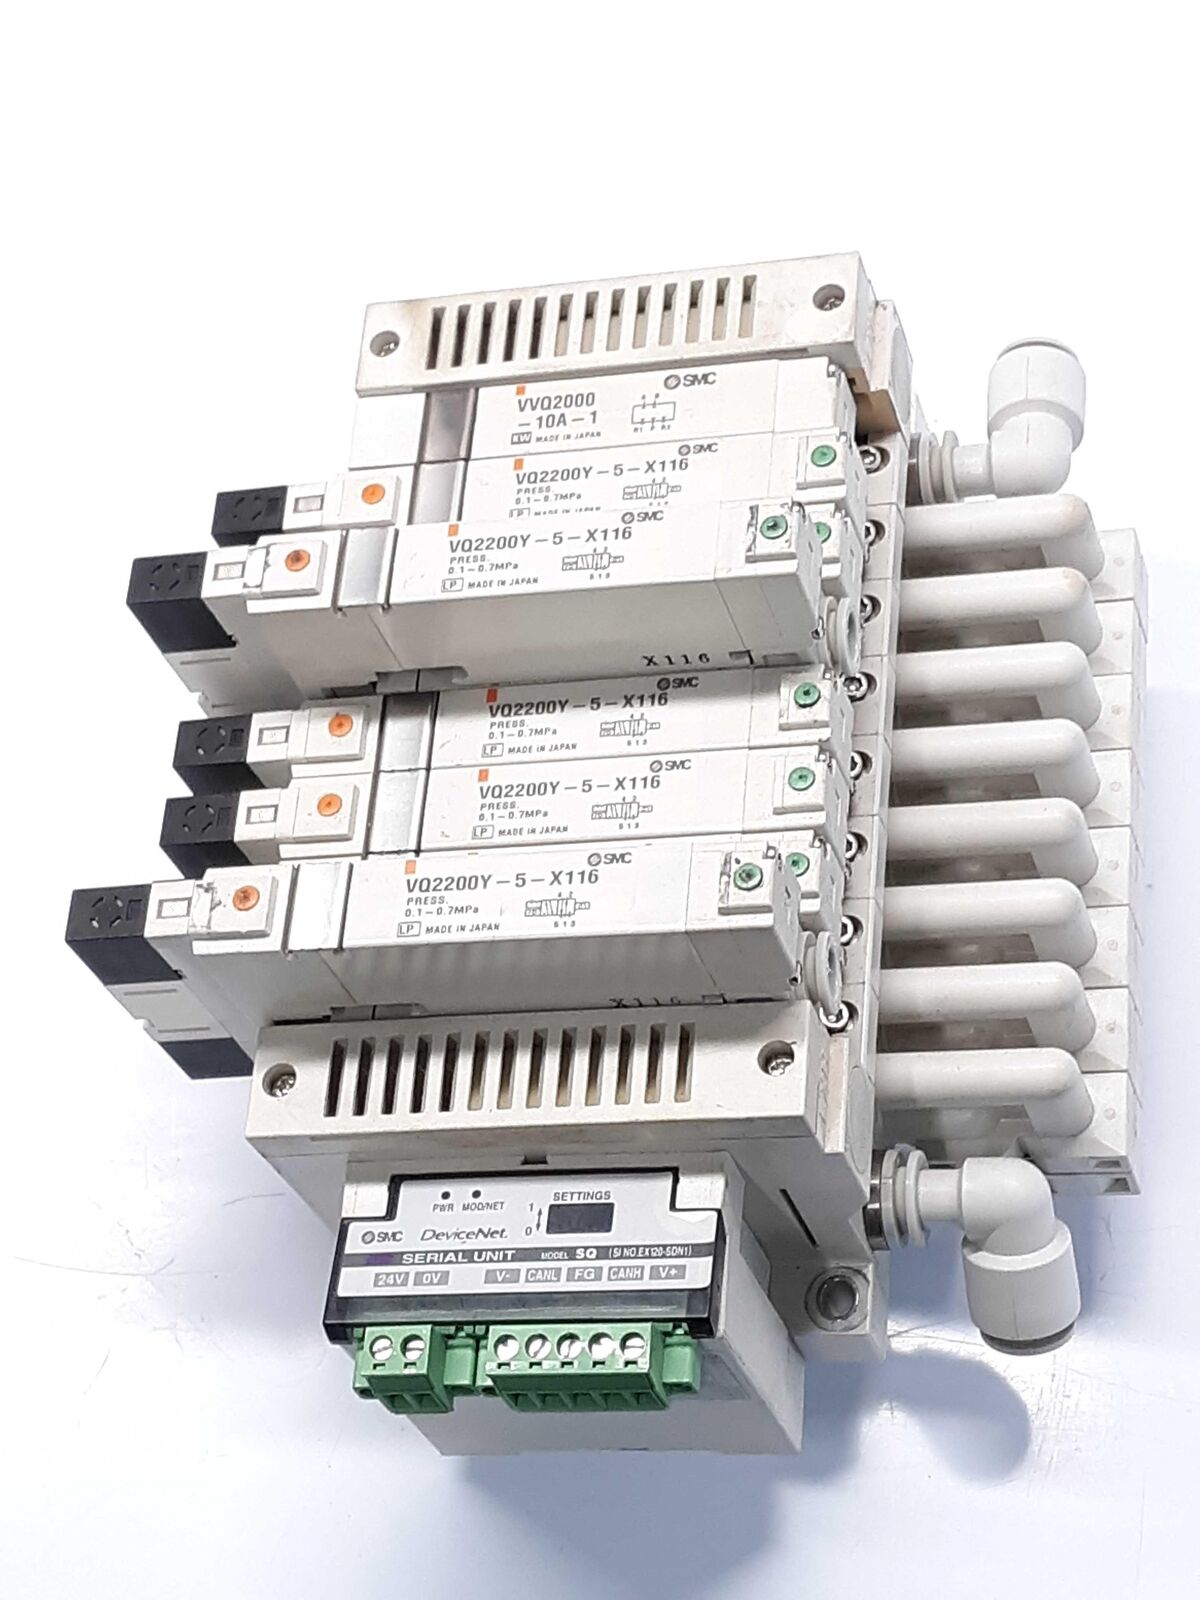 SMC EX120-SDN1 DeviceNet  Serial Interface with Solenoid Valves  